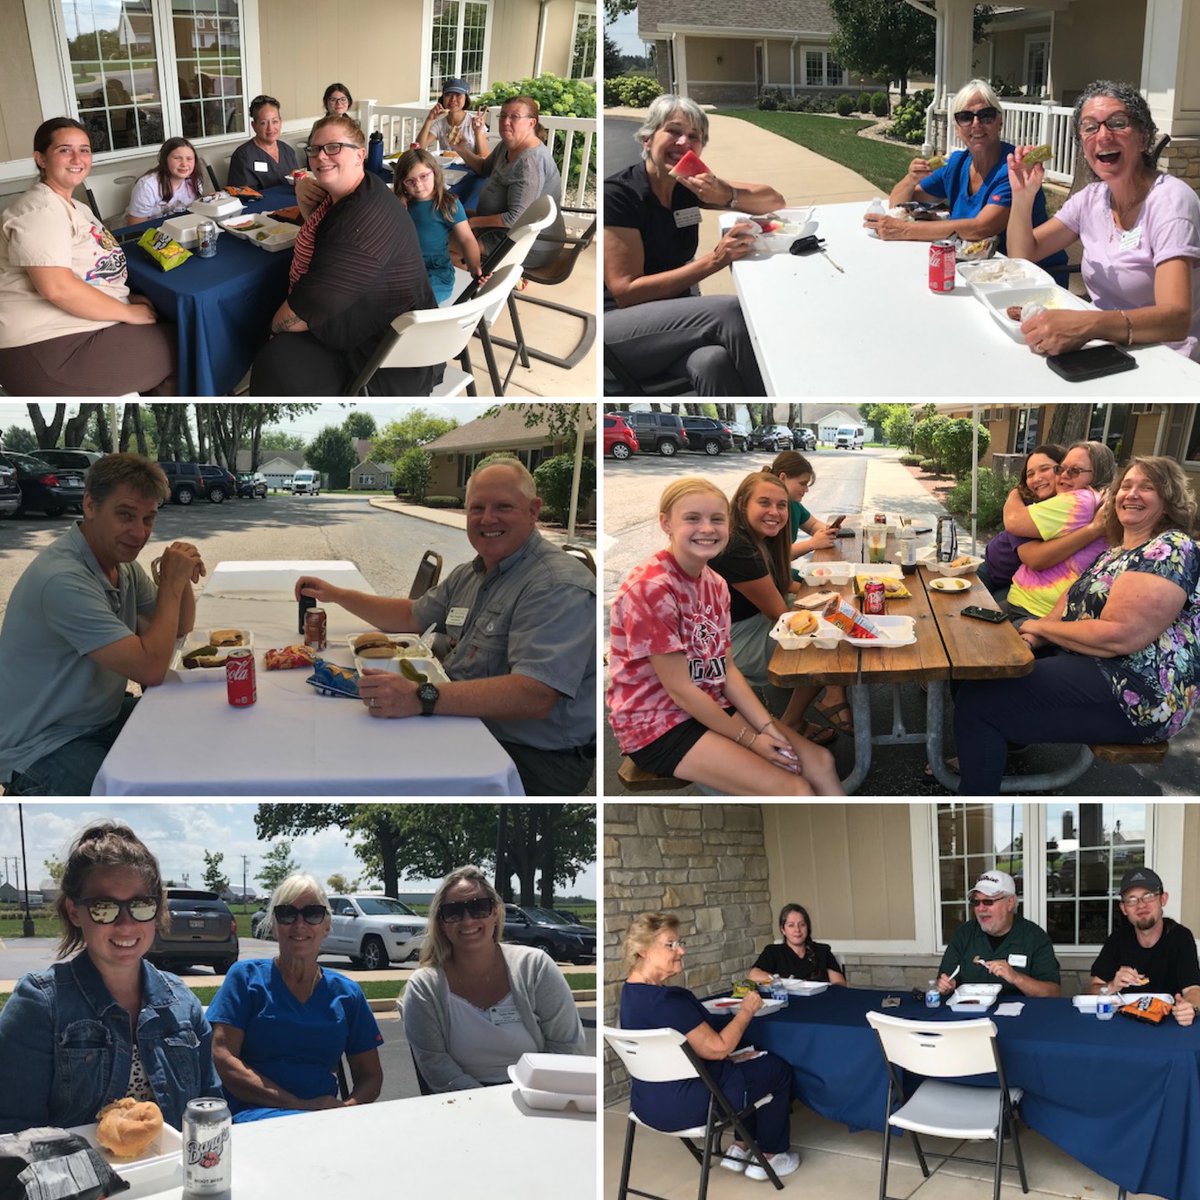 Enjoying some delicious brats and burgers from Sorgs Quality Meats and Sausages during our recent cook-out for our awesome staff! (and no - there were not any widespread reports of illness due to Jon and Jeff's cooking!) #loveourstaff